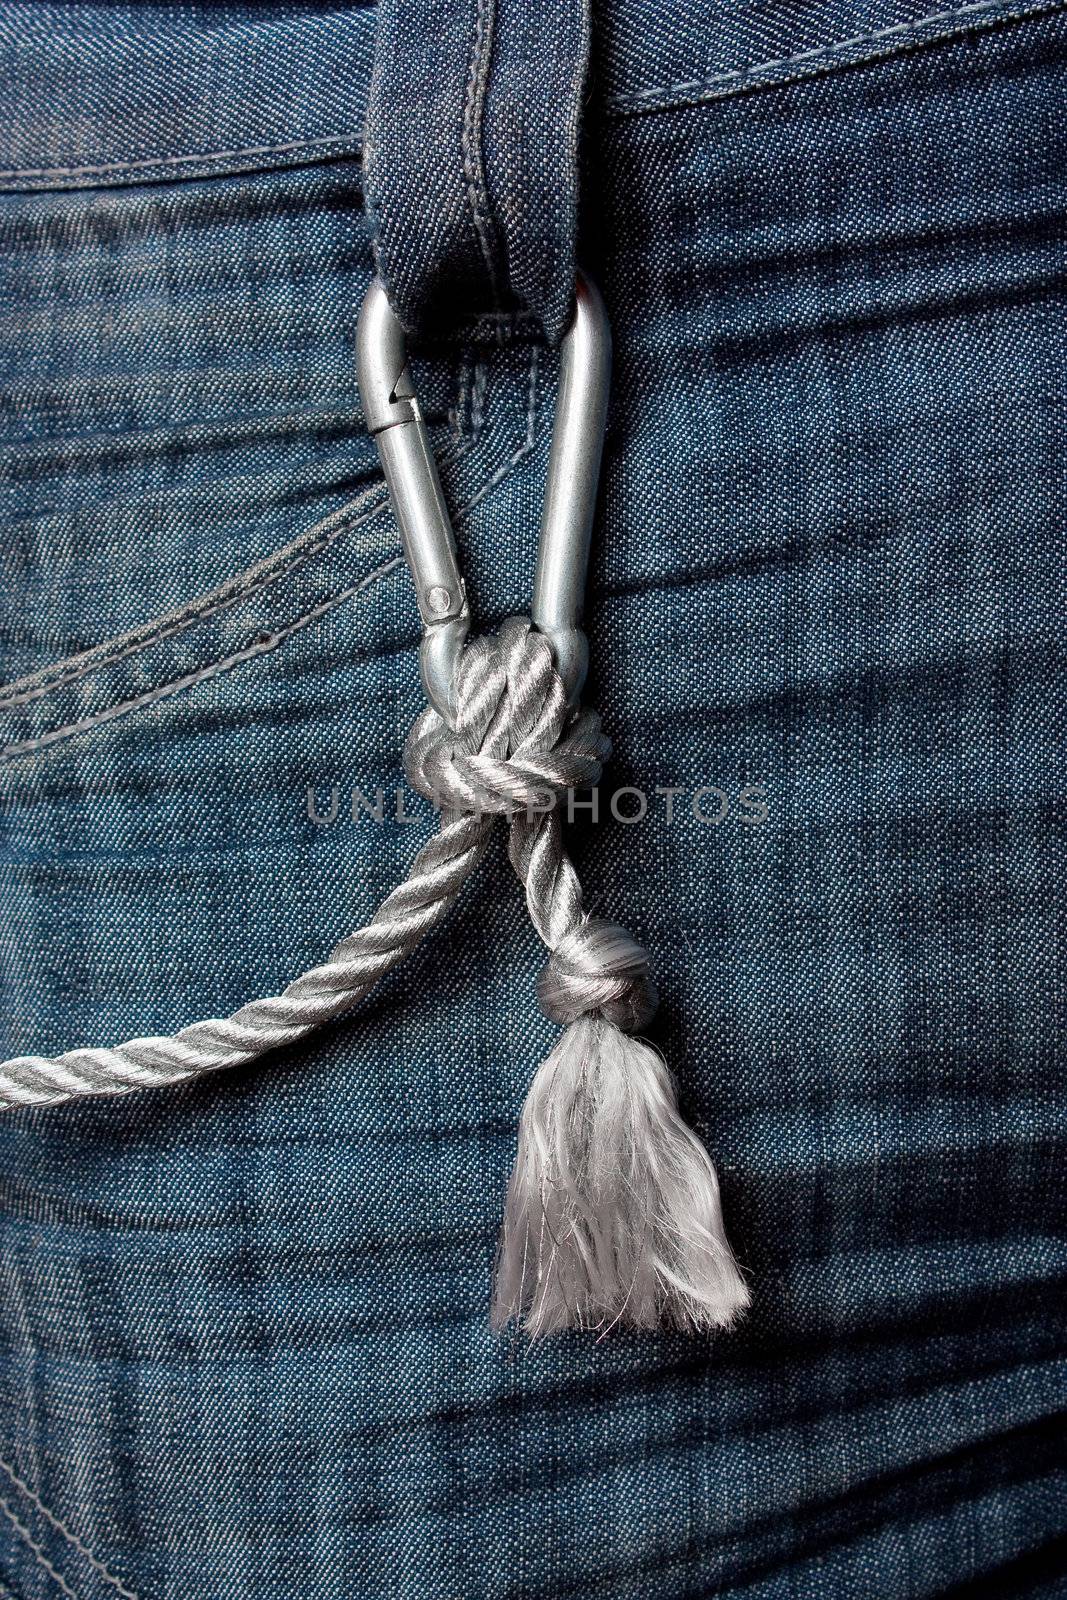 Carabiner climbing with a rope fastened to the jeans